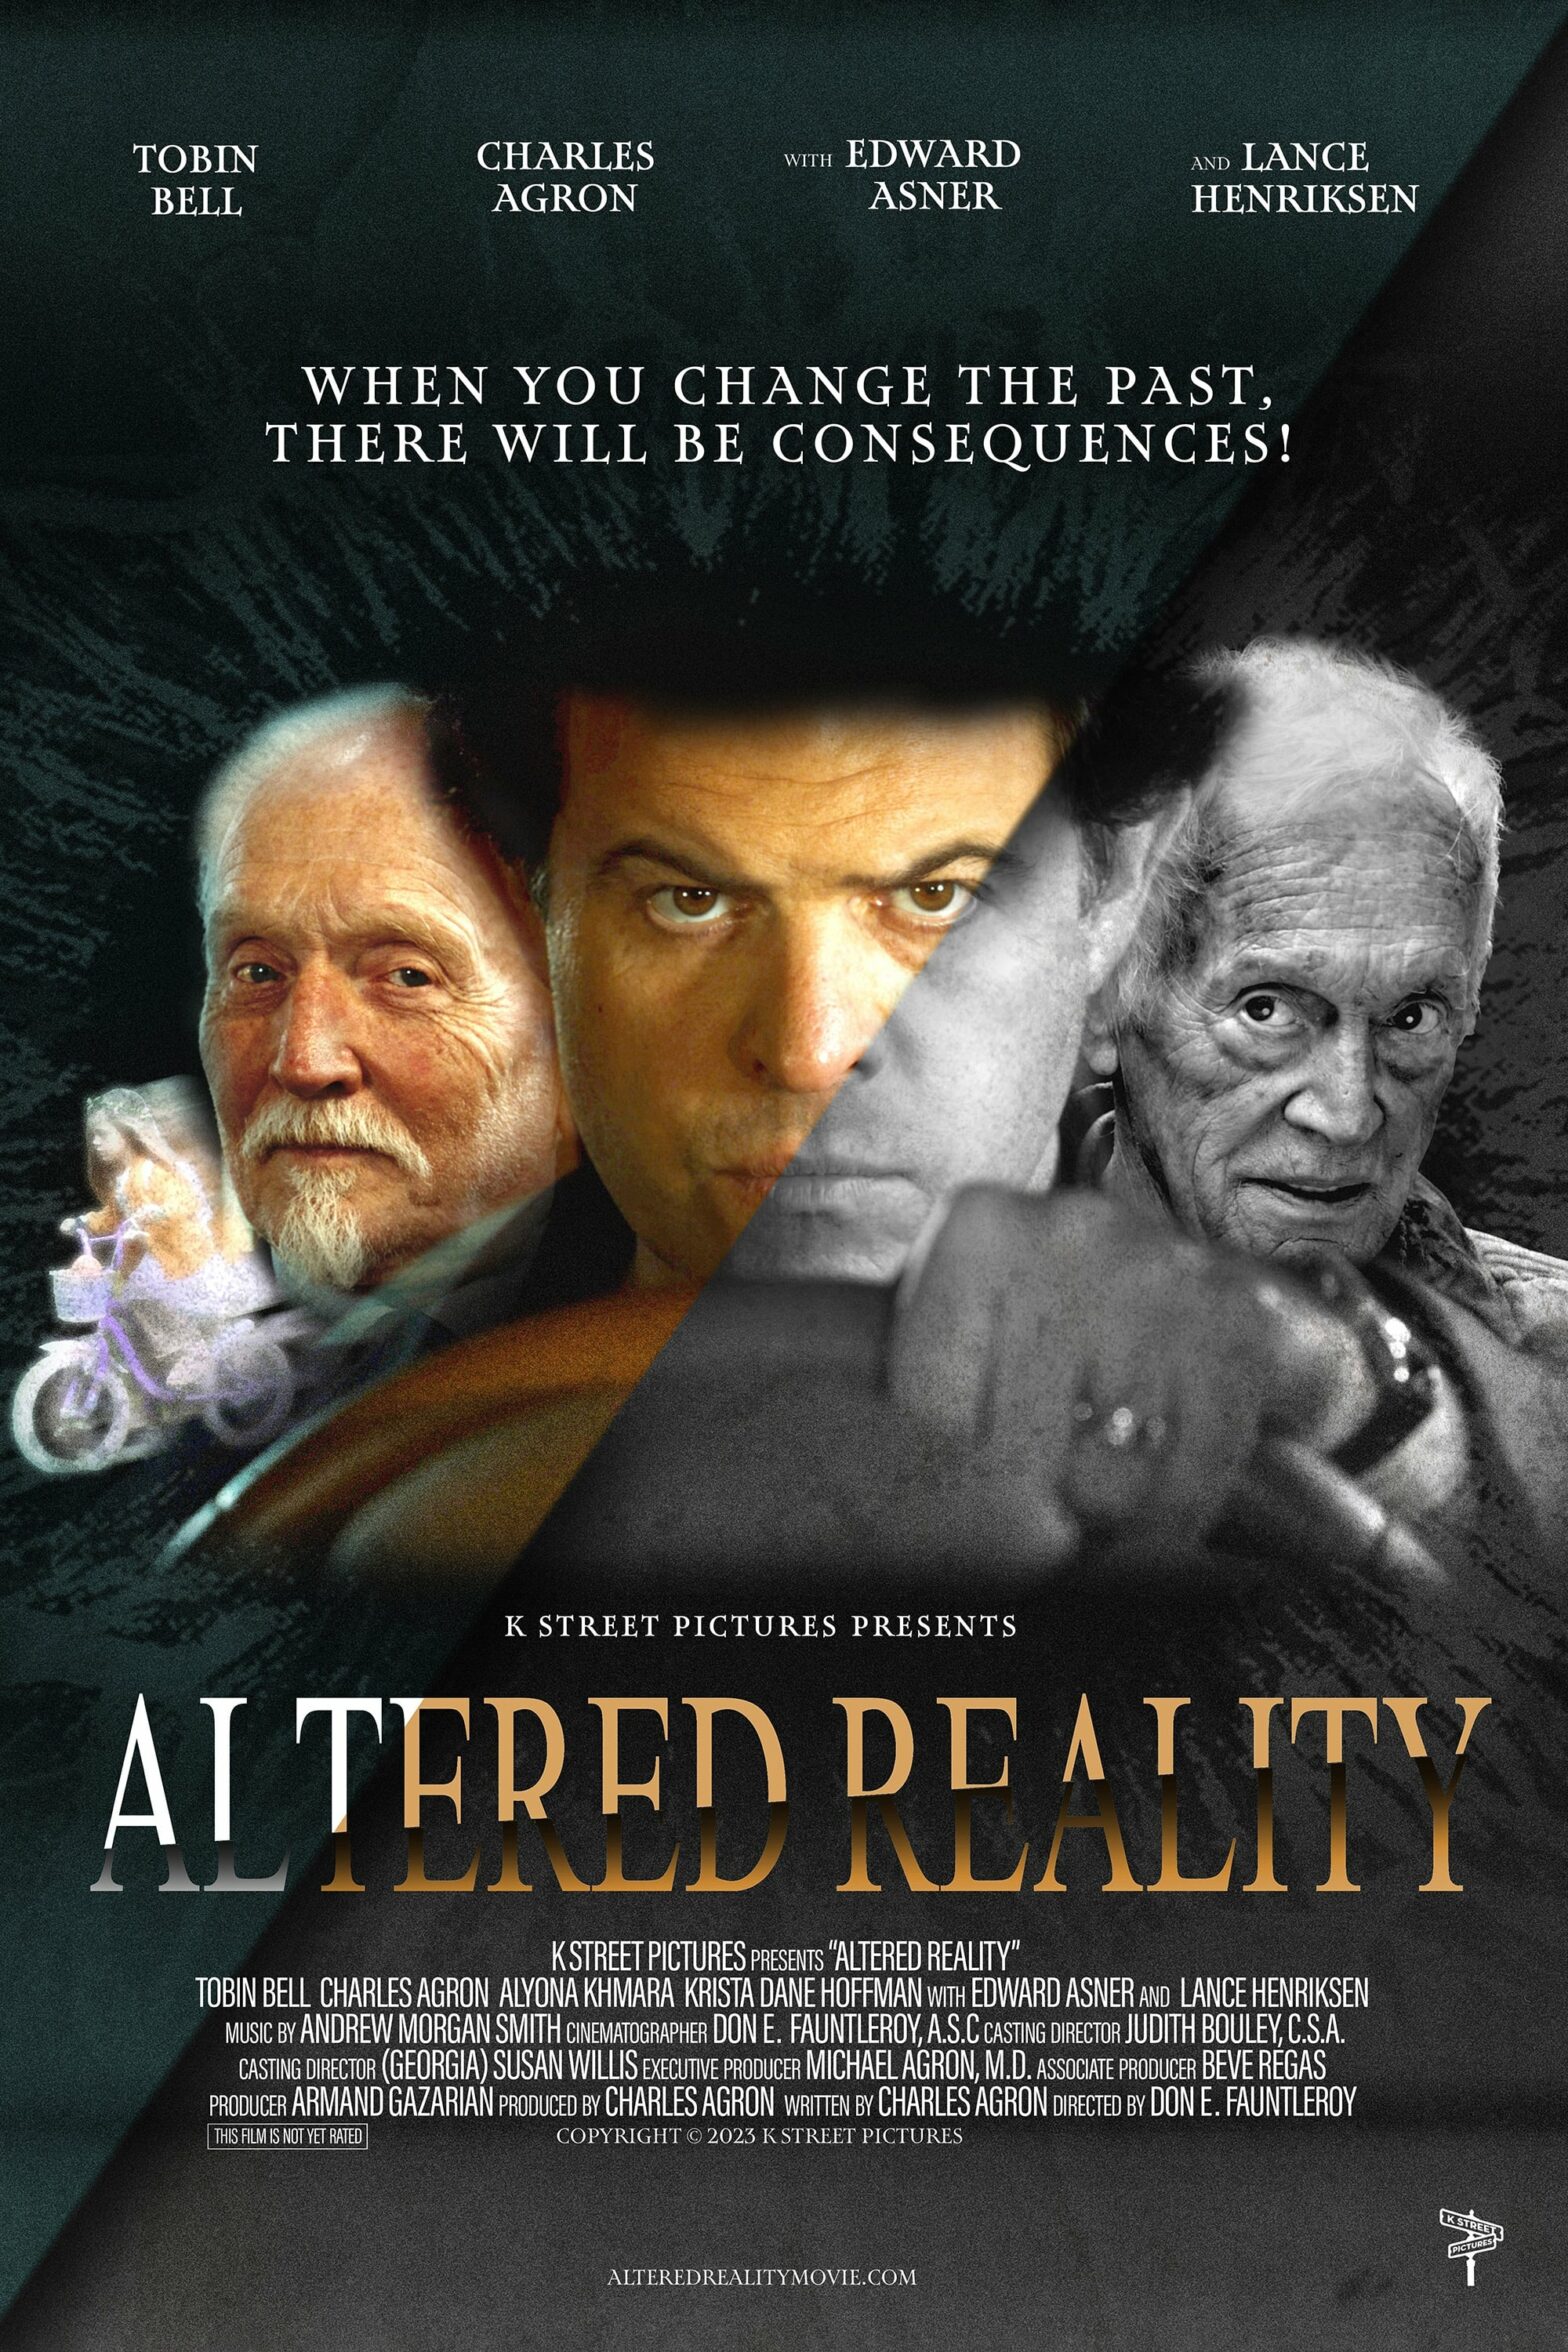 Poster for the movie "Altered Reality"